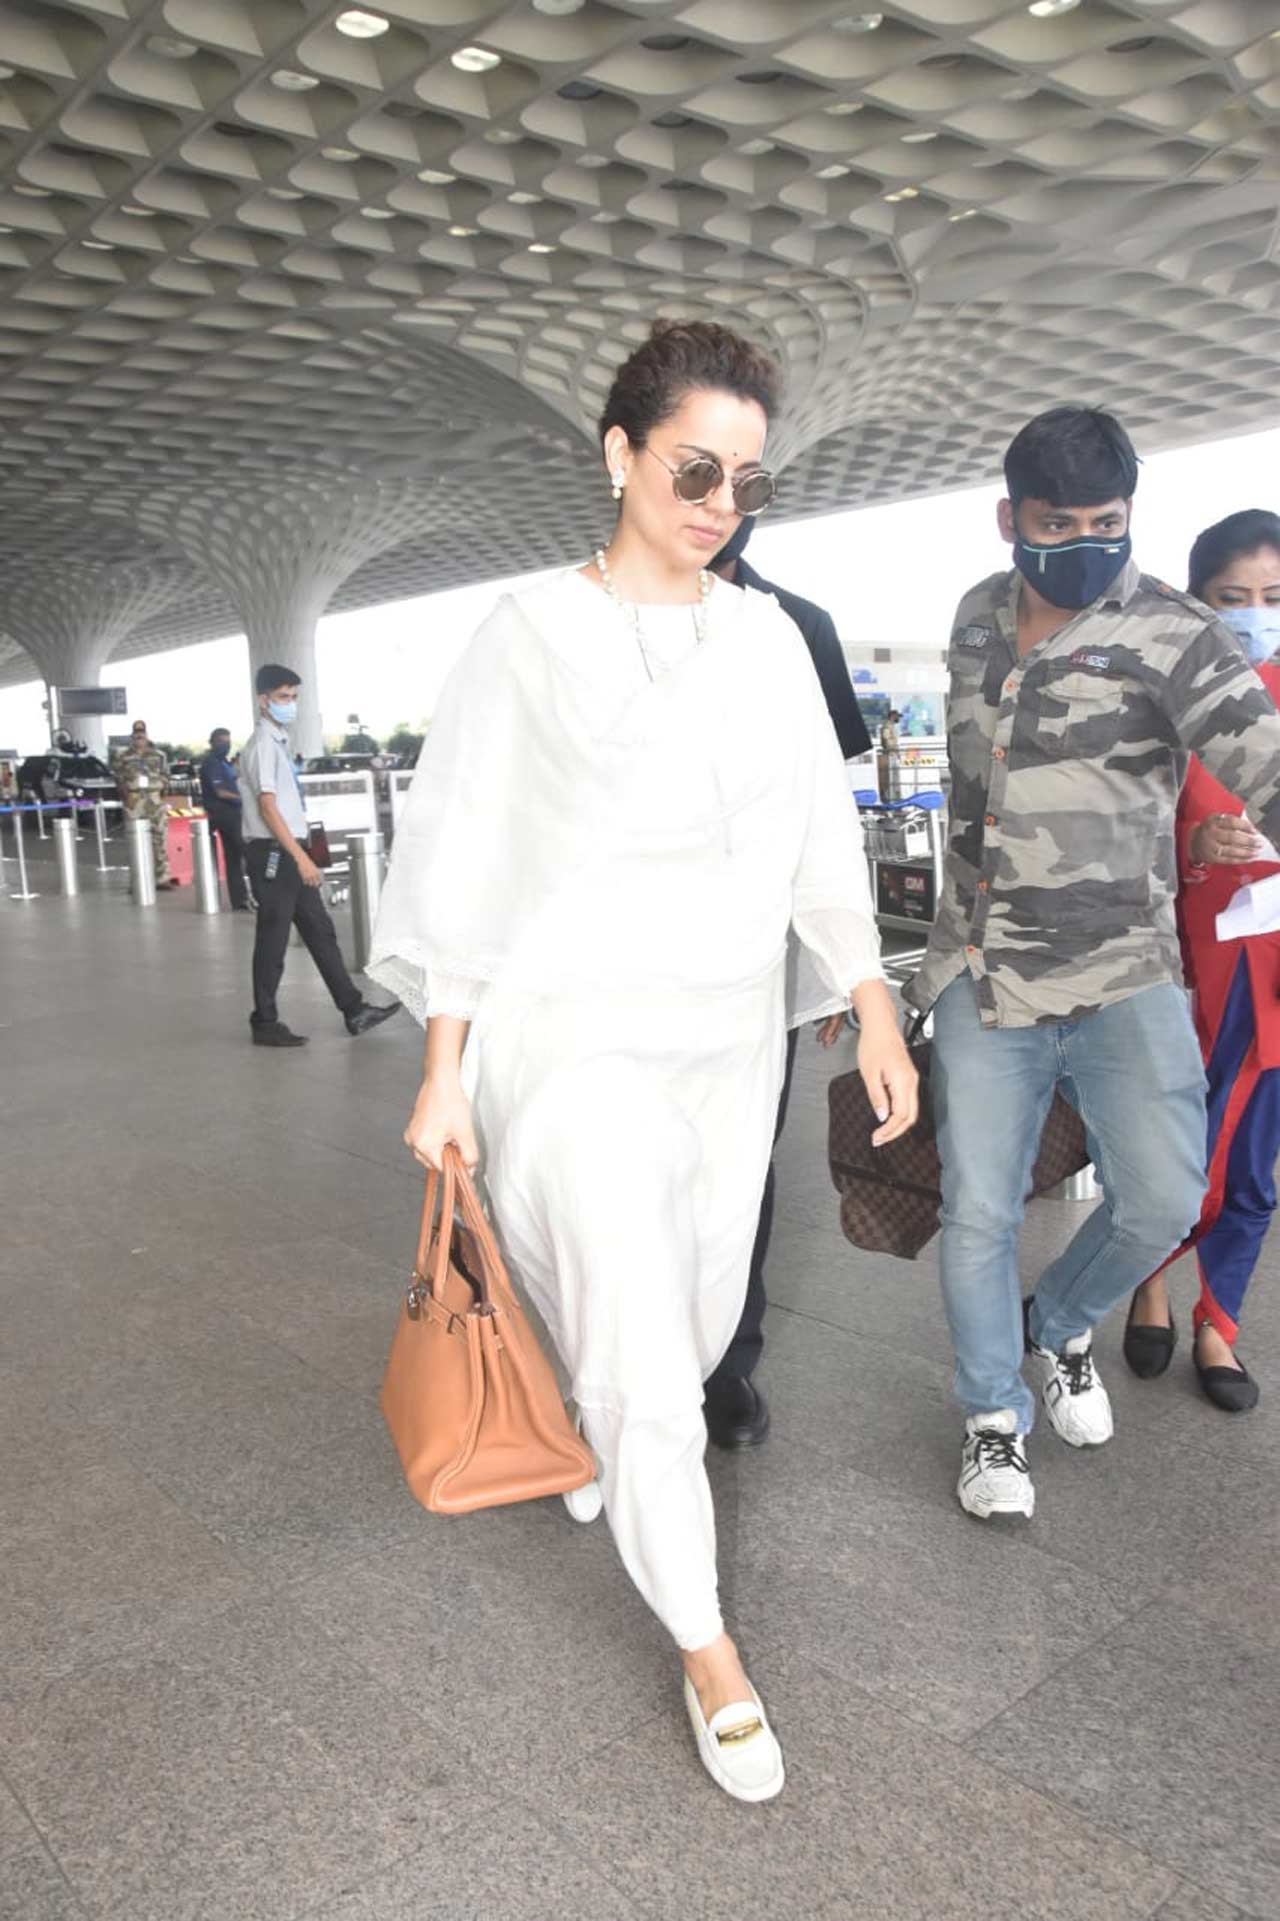 Kangana Ranaut, who will be next seen in Tejas, was also snapped at the Mumbai airport. Kangana also has other projects including 'Manikarnika Returns: The Legend Of Didda', 'Emergency' and ' The Incarnation: Sita' in her kitty.